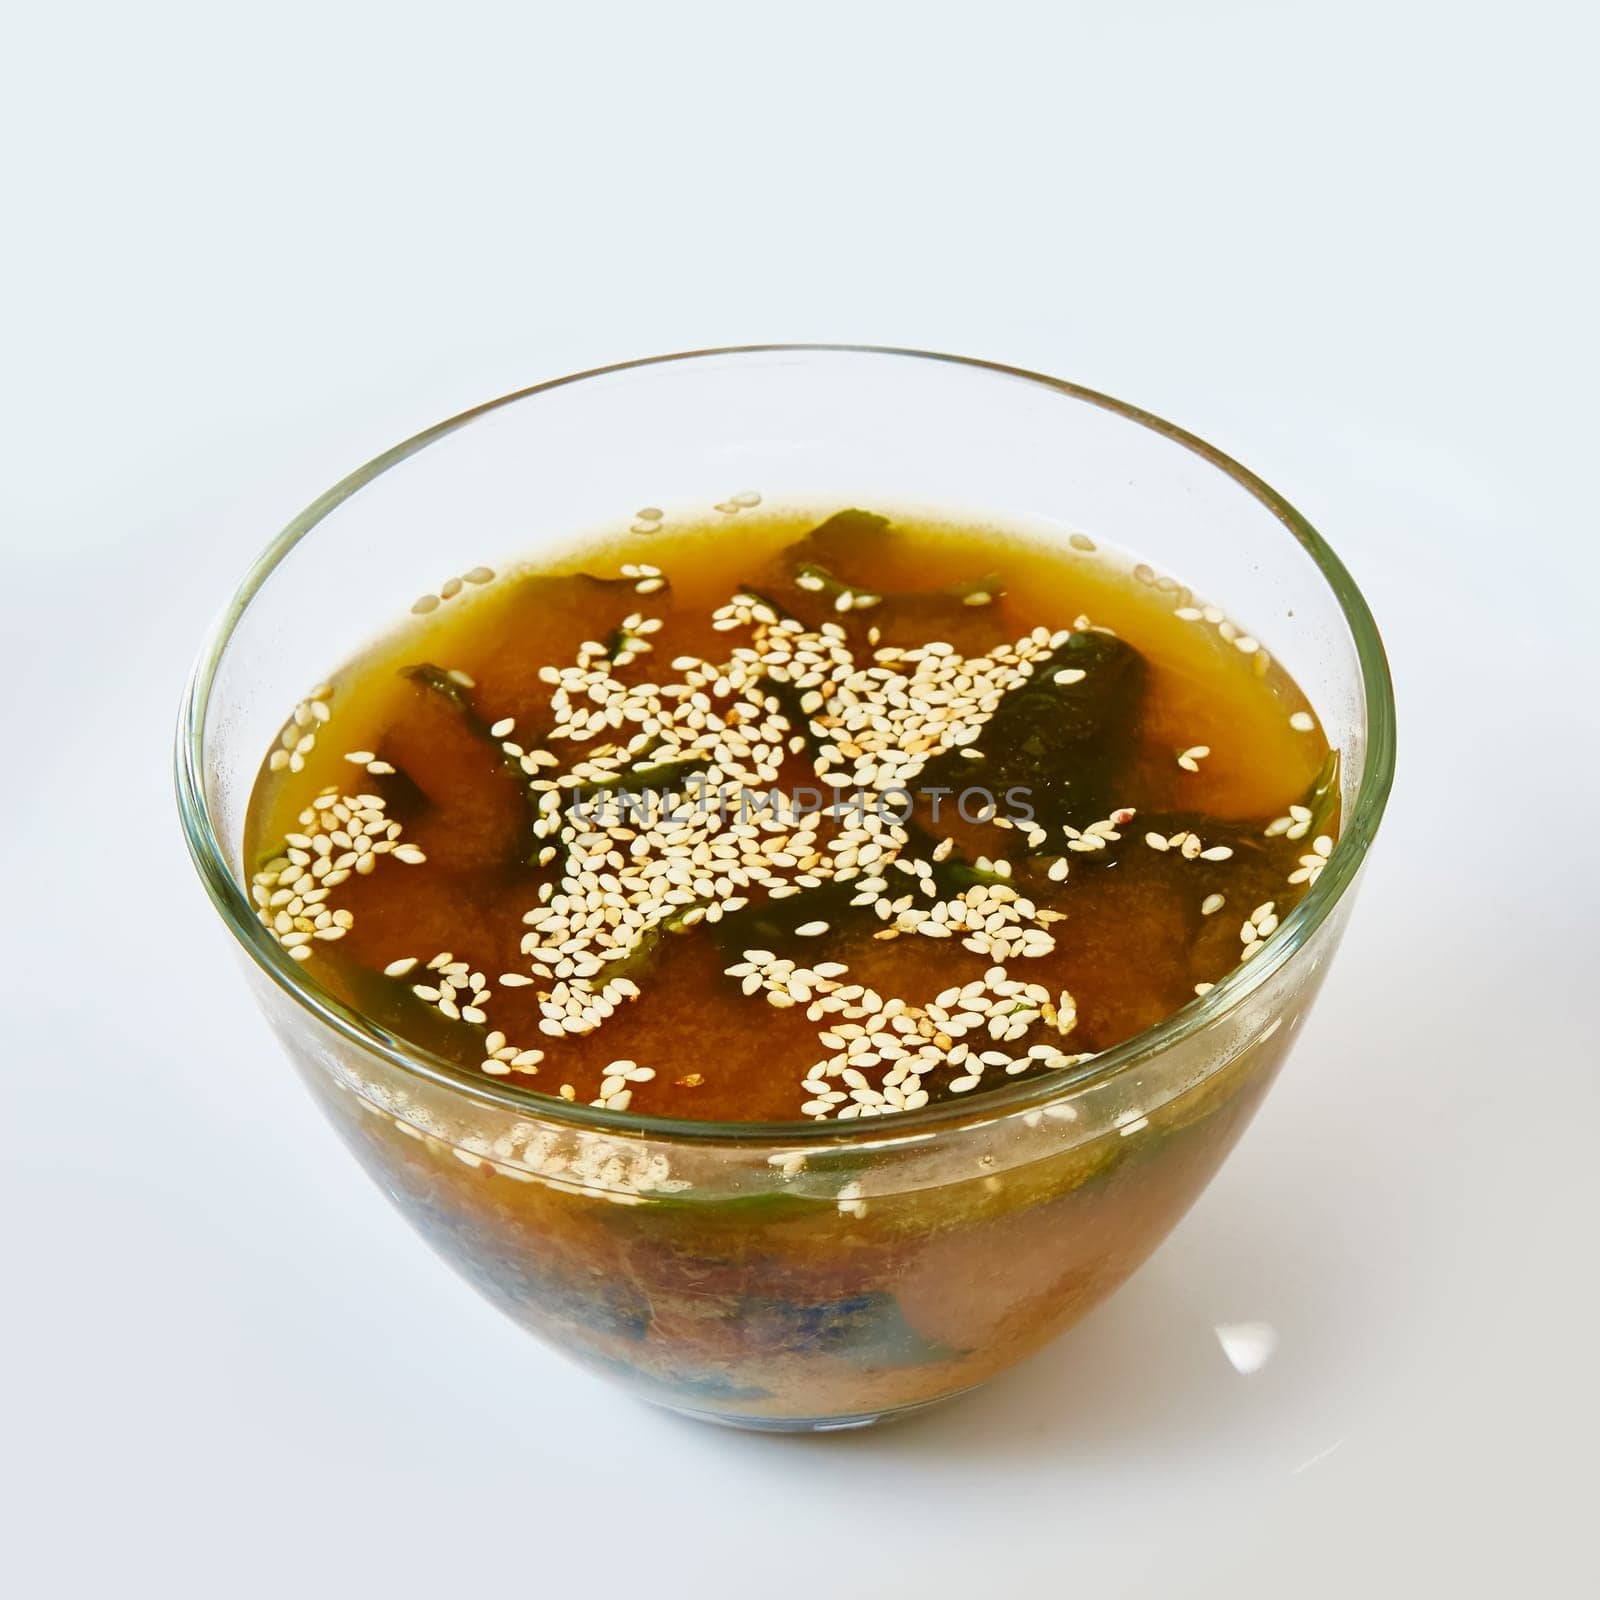 The Miso soup, Japanese Food. Shallow dof